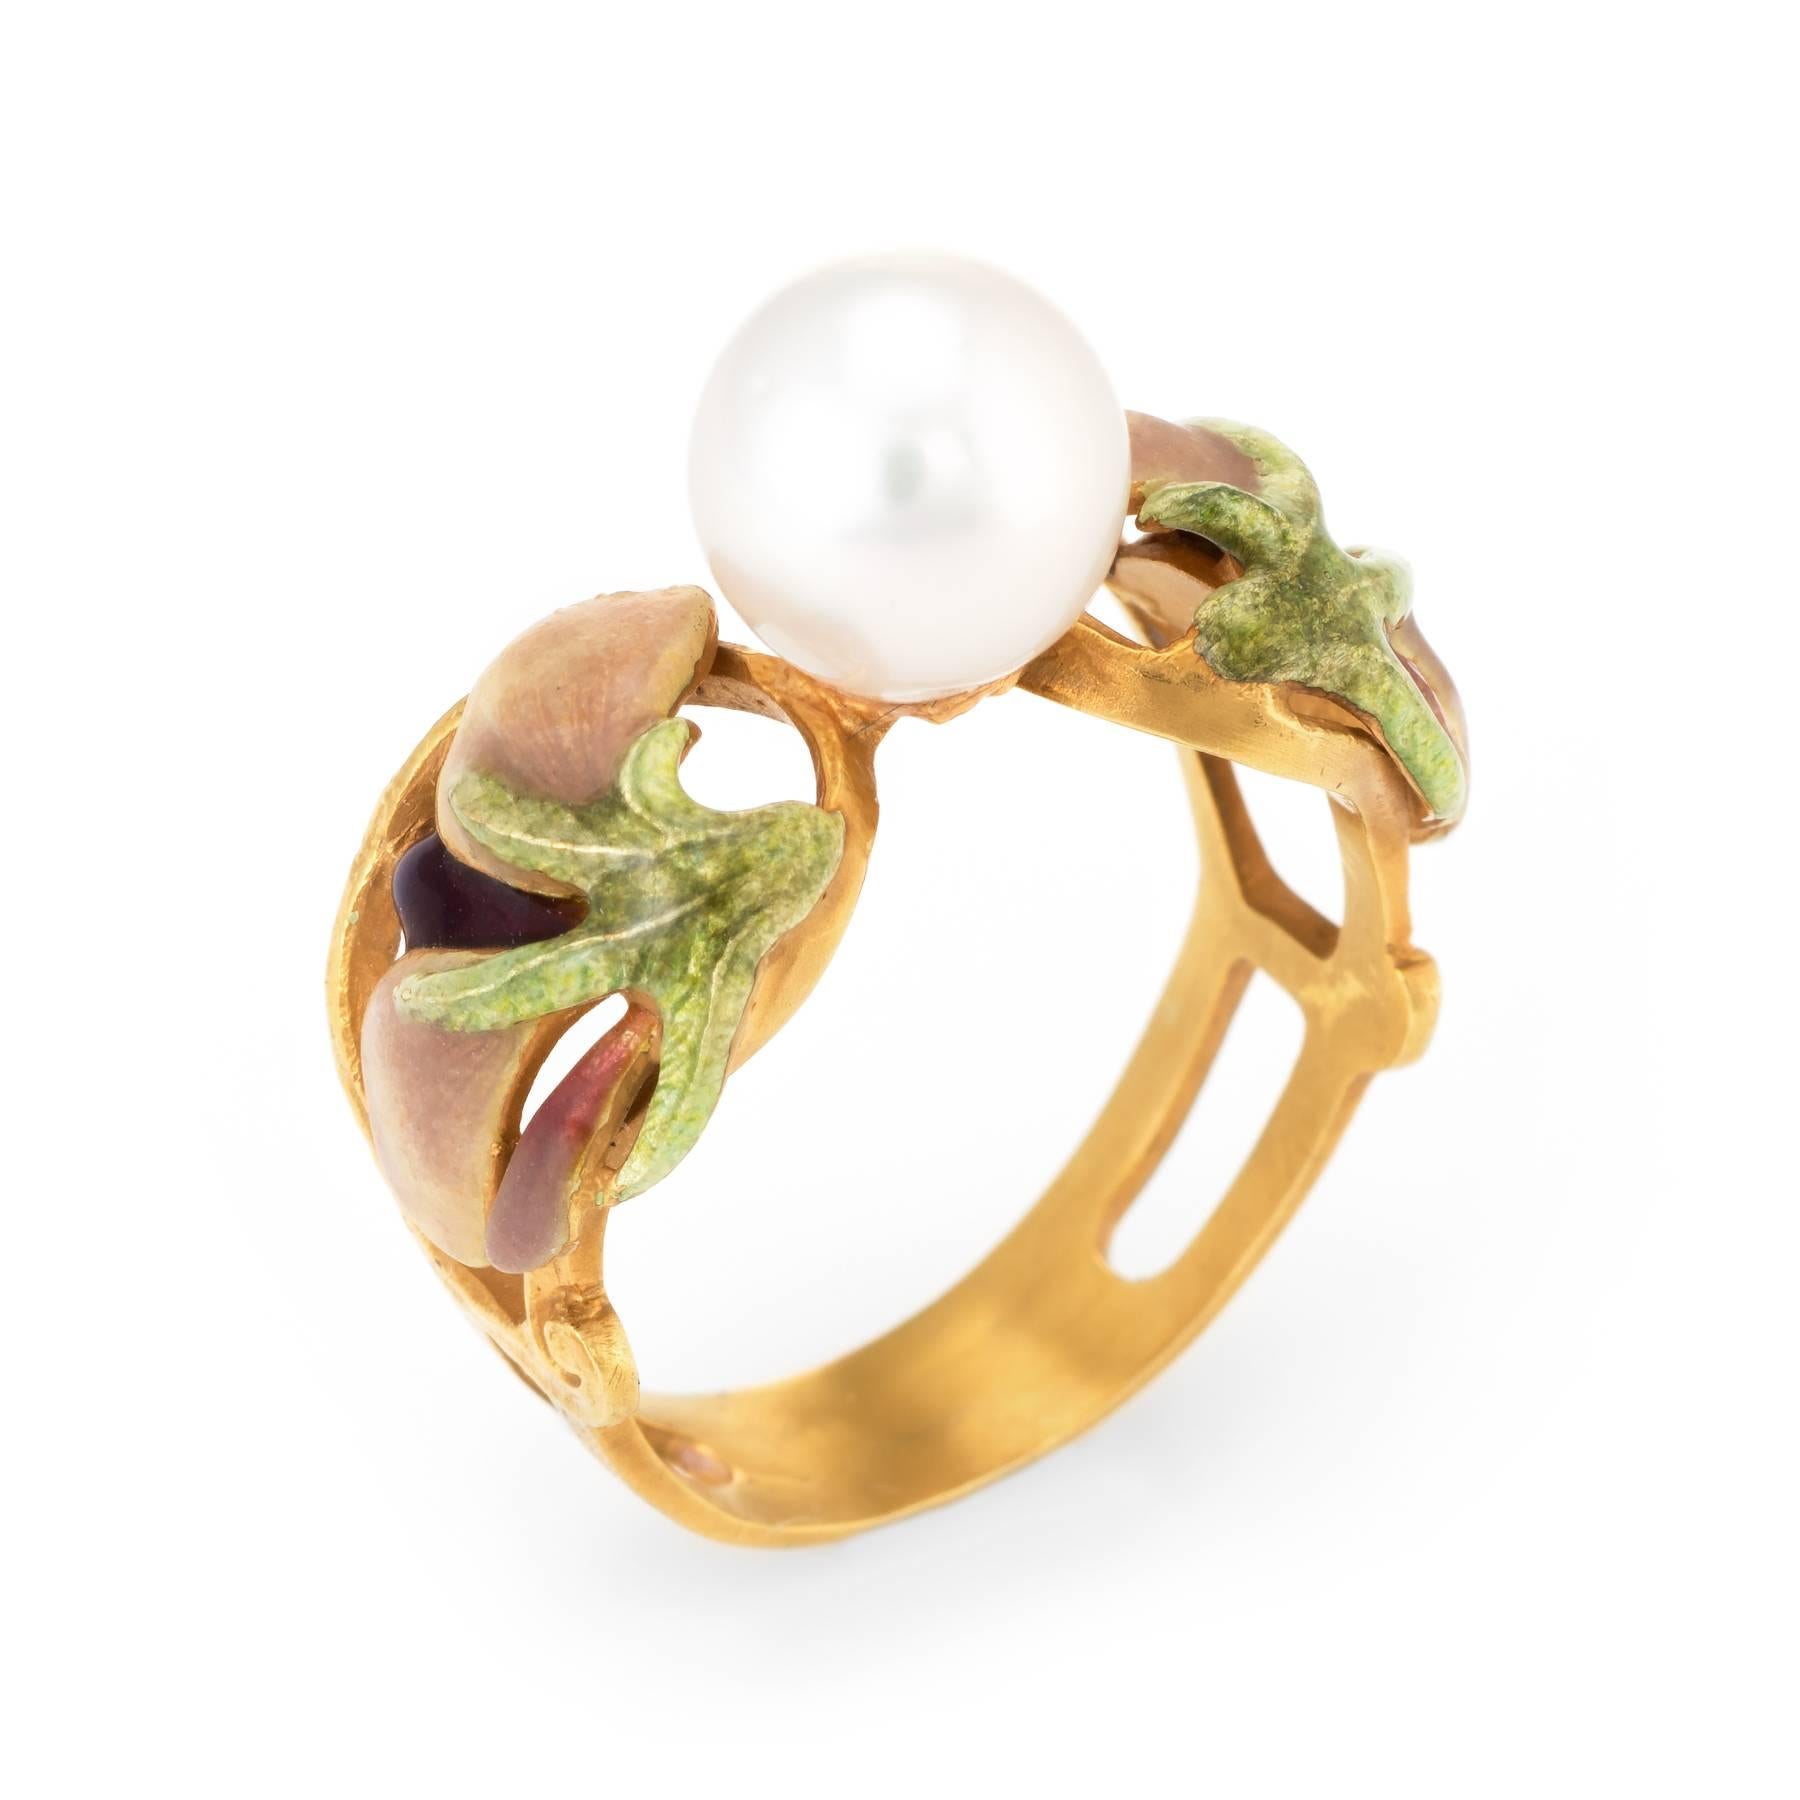 Elegant estate Masriera ring, crafted in 18 karat yellow gold. 

Centrally mounted cultured pearl measures 8mm. The pearl is lustrous with a thick nacre and shows a lovely rose overtone. The enamel is in excellent condition and free of cracks or